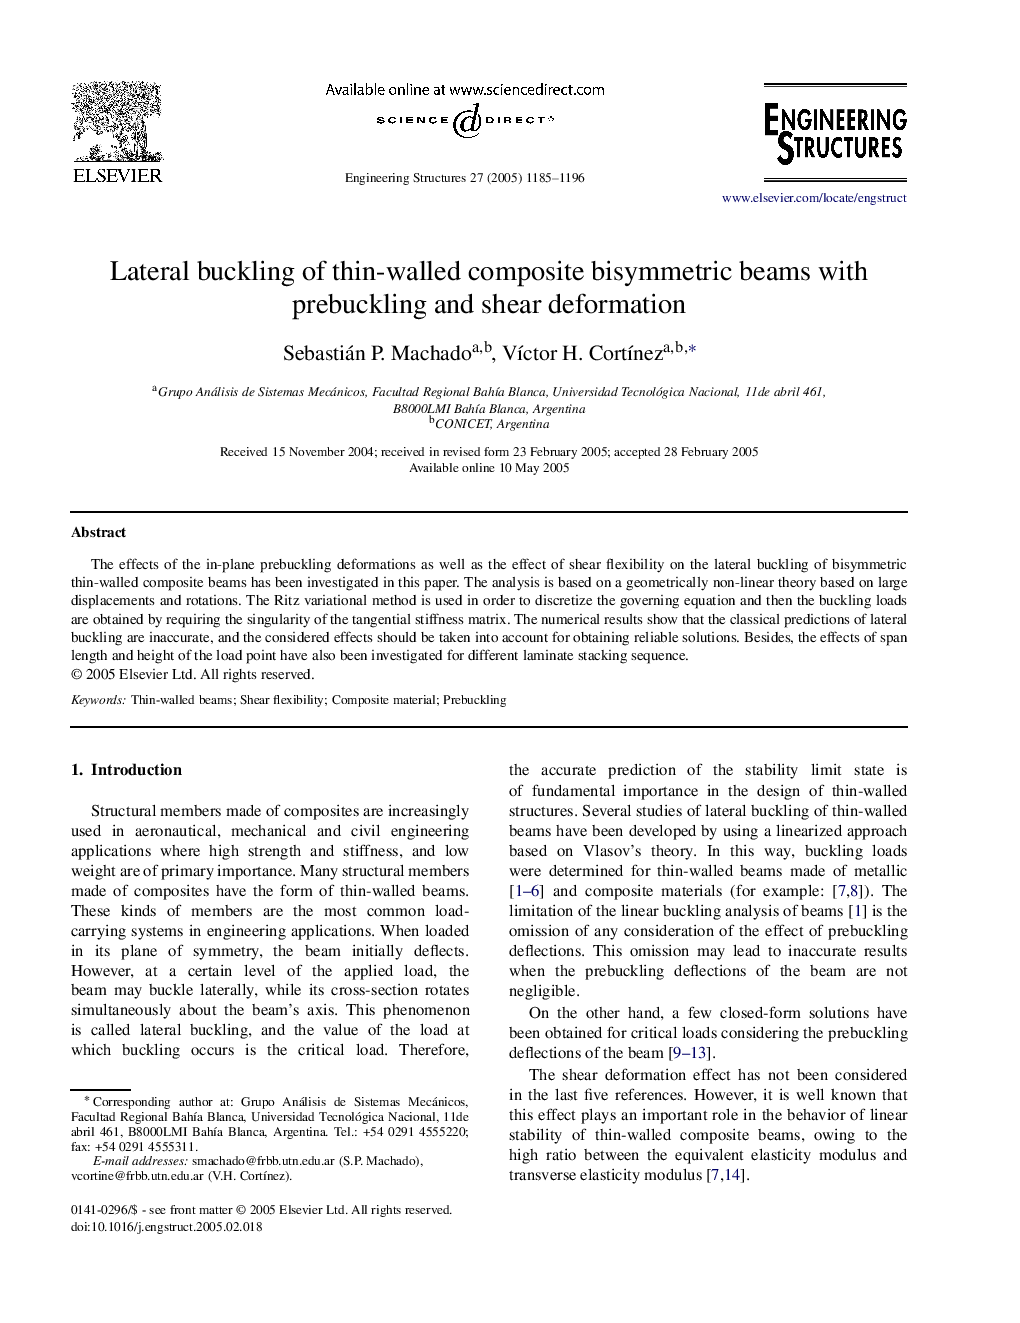 Lateral buckling of thin-walled composite bisymmetric beams with prebuckling and shear deformation